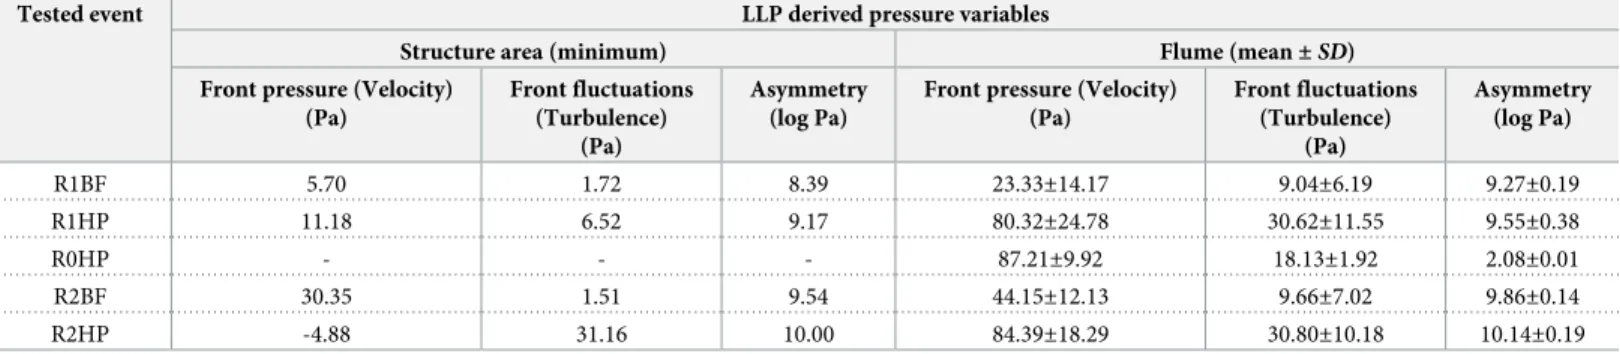 Table 3. Minimum (Pa) and mean ± SD (Pa) LLP derived pressure variables. The minimum pressure values (Pa) for mean front pressure (� p 12 ), mean front pressure fluctuations (� p 0 12 ) and mean pressure asymmetry (D�p 1 6 ) refer to the results observed i